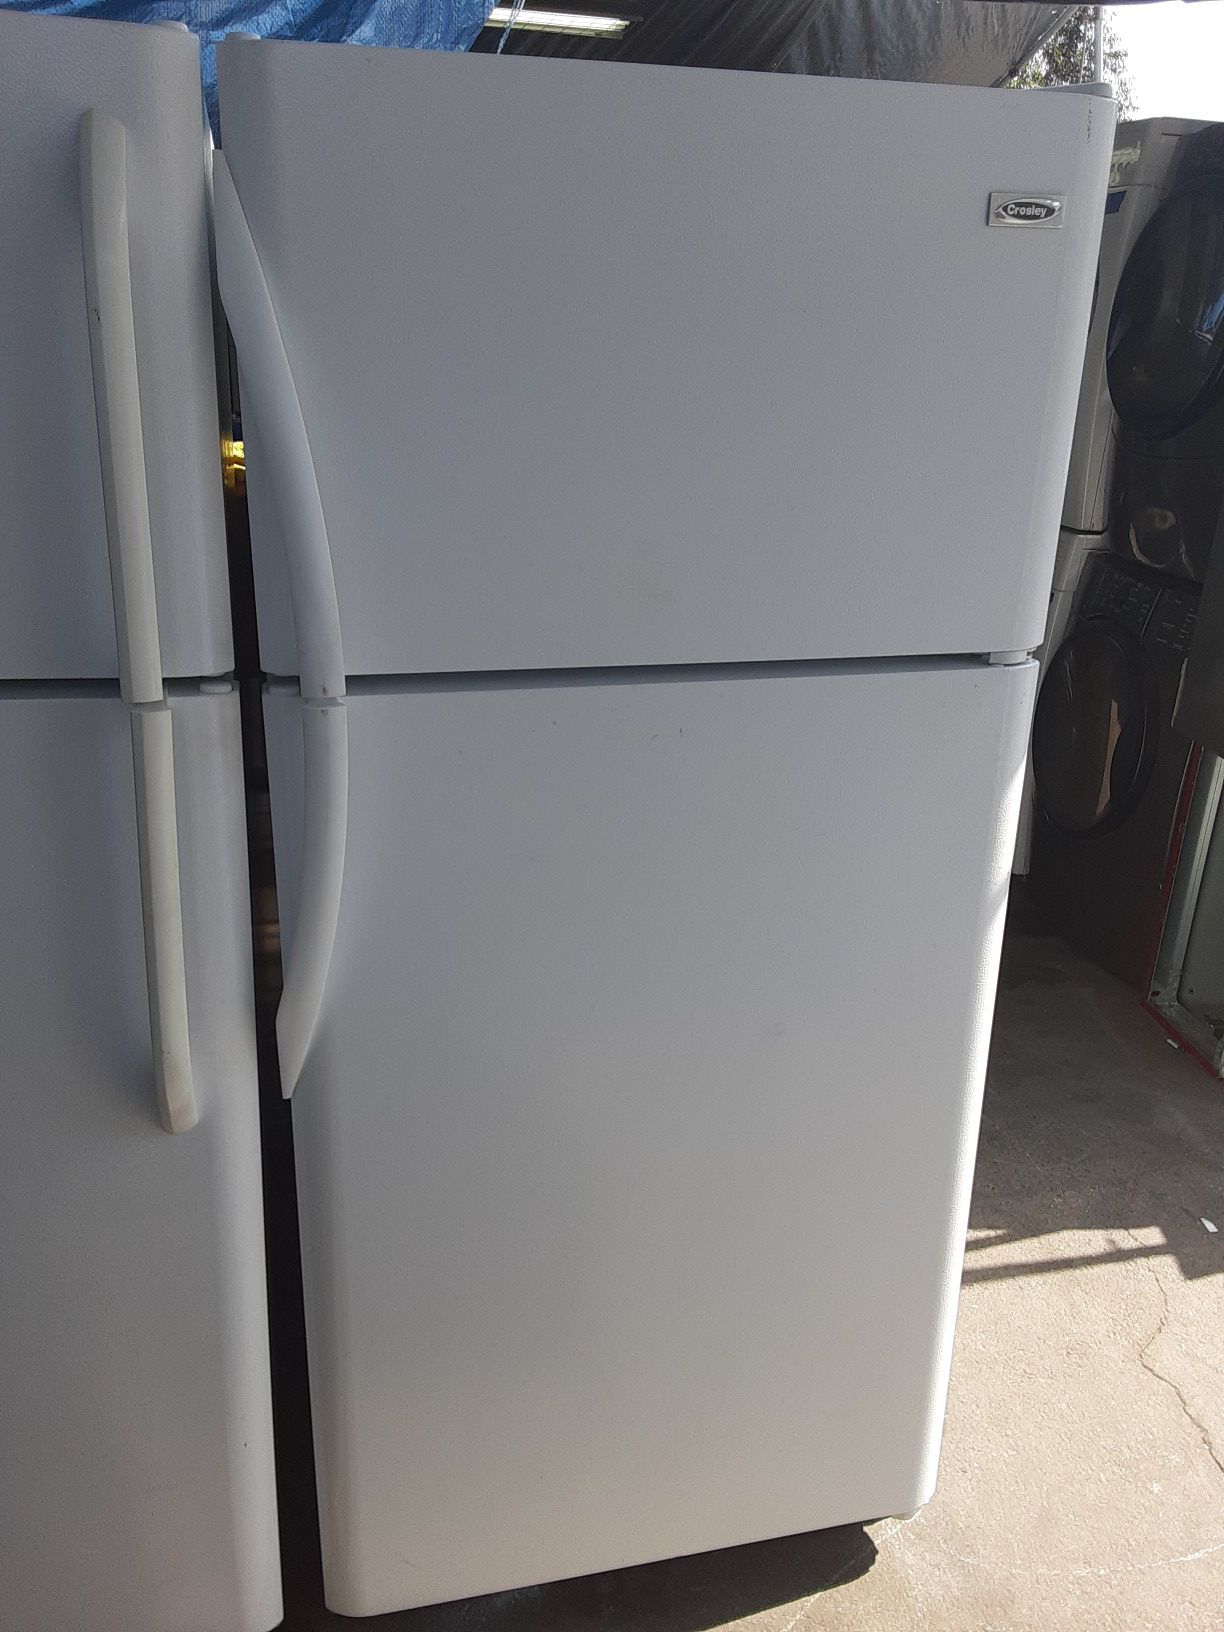 $265 Crossley white 18 cubic fridge includes delivery in the San Fernando Valley a warranty and installation